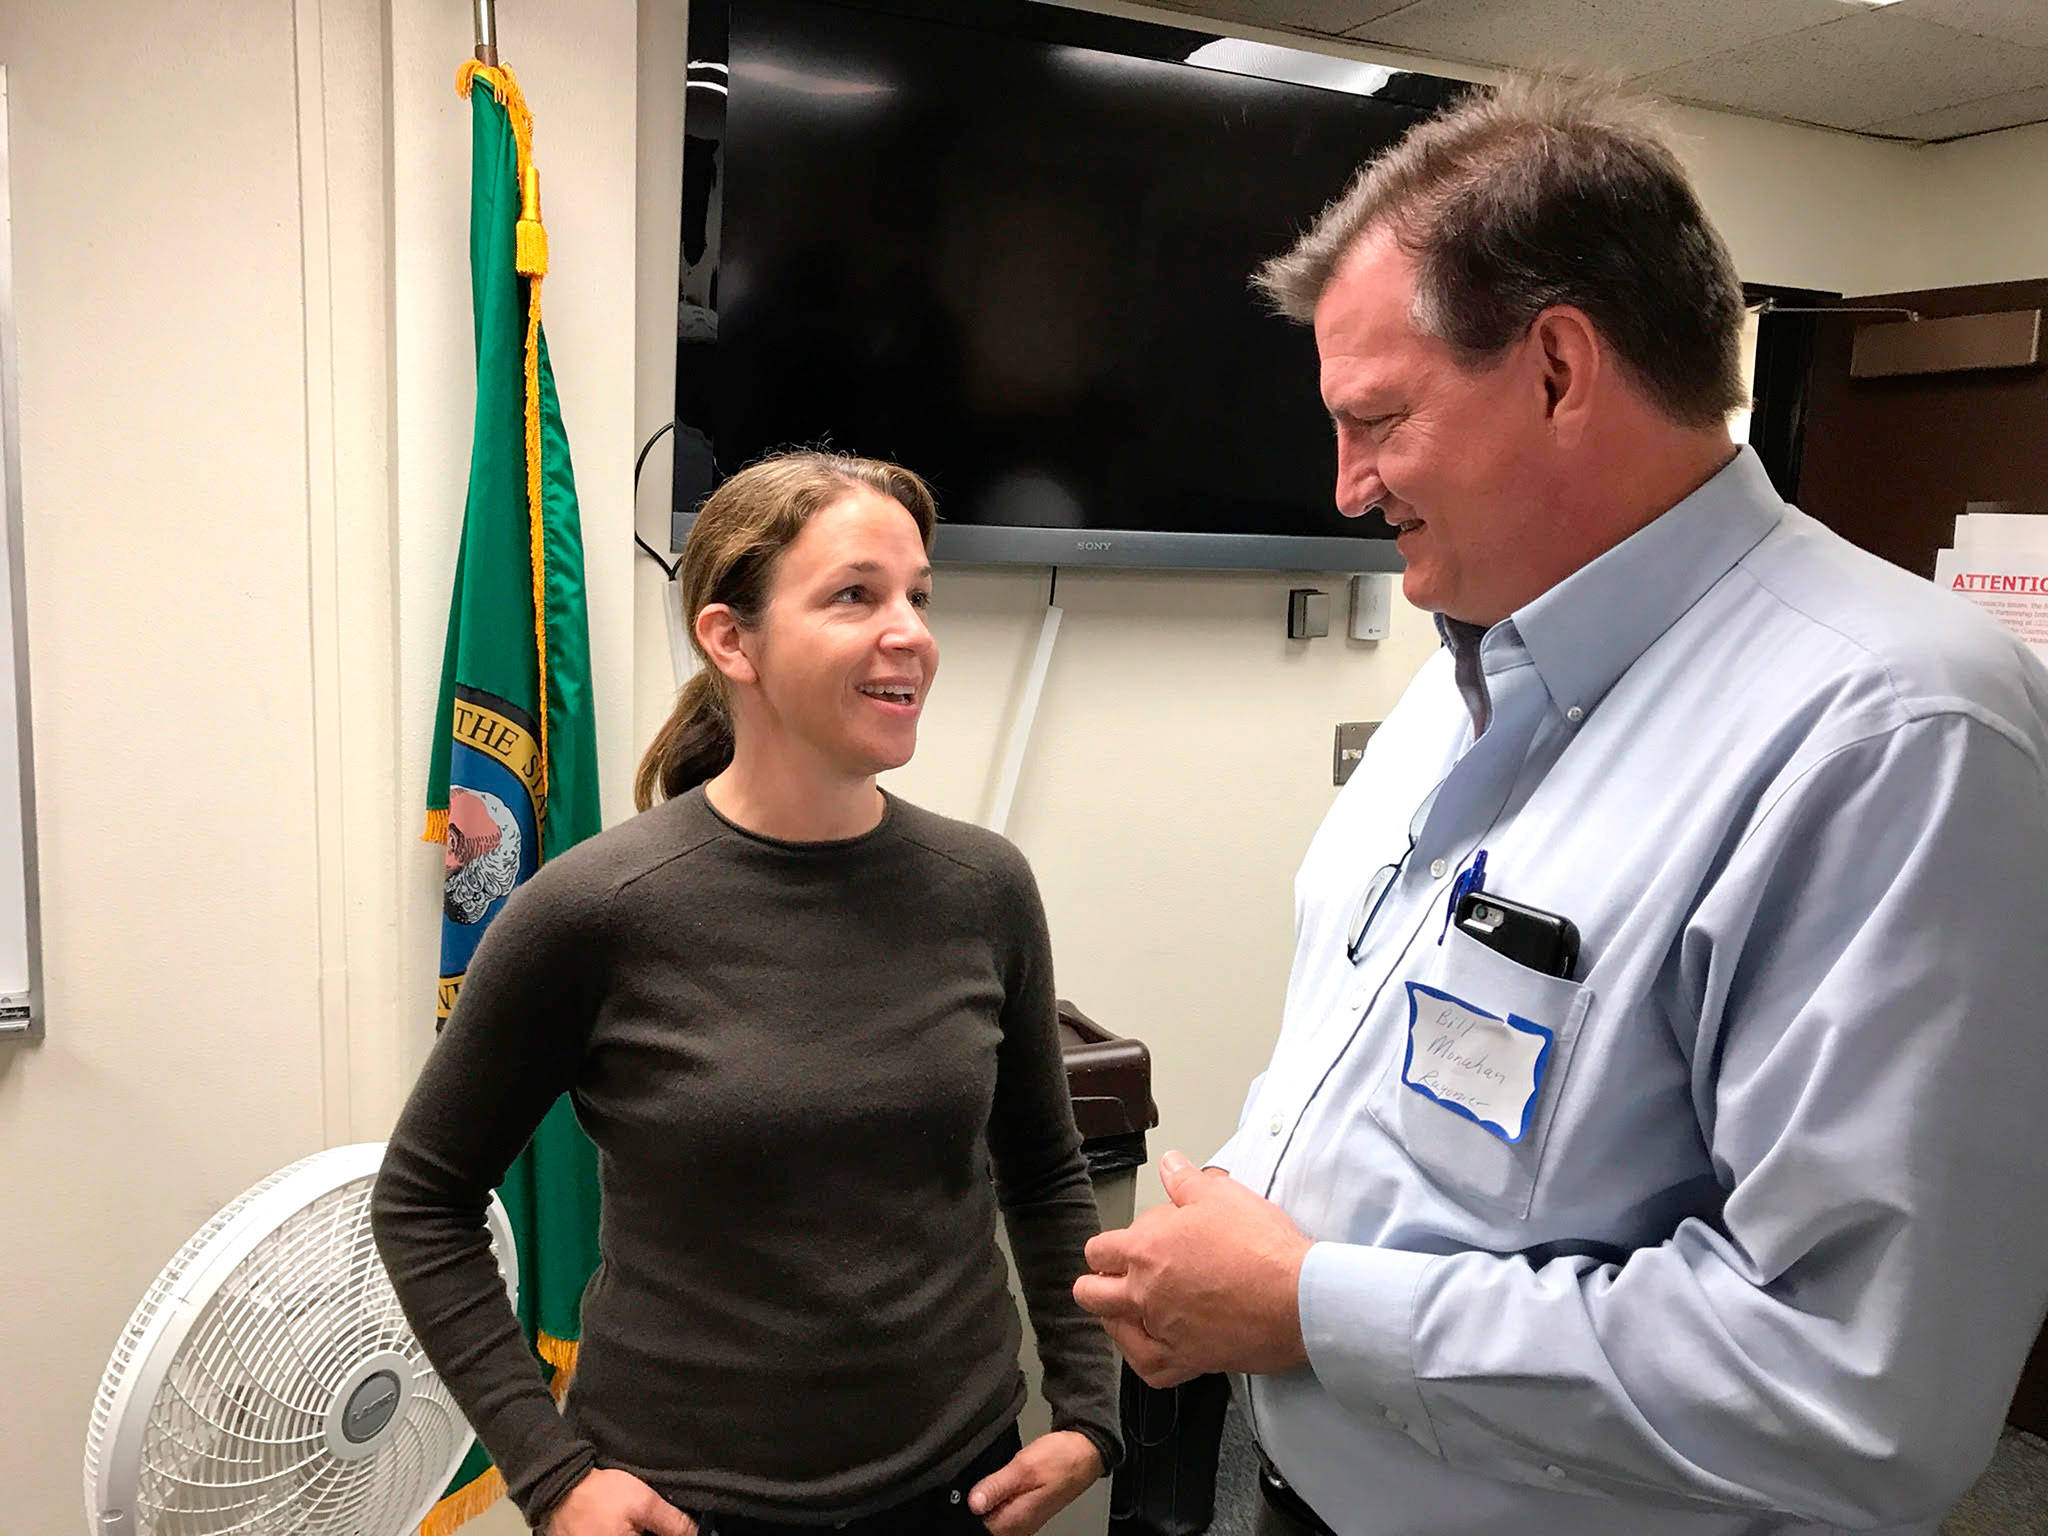 Hilary Franz, state commissioner of public lands, talks with Bill Monahan, a Rayonier forest products company supervisor, before Franz’s presentation on a new agency initiative Thursday to a packed audience at the Clallam County Courthouse. (Paul Gottlieb/Peninsula Daily News)